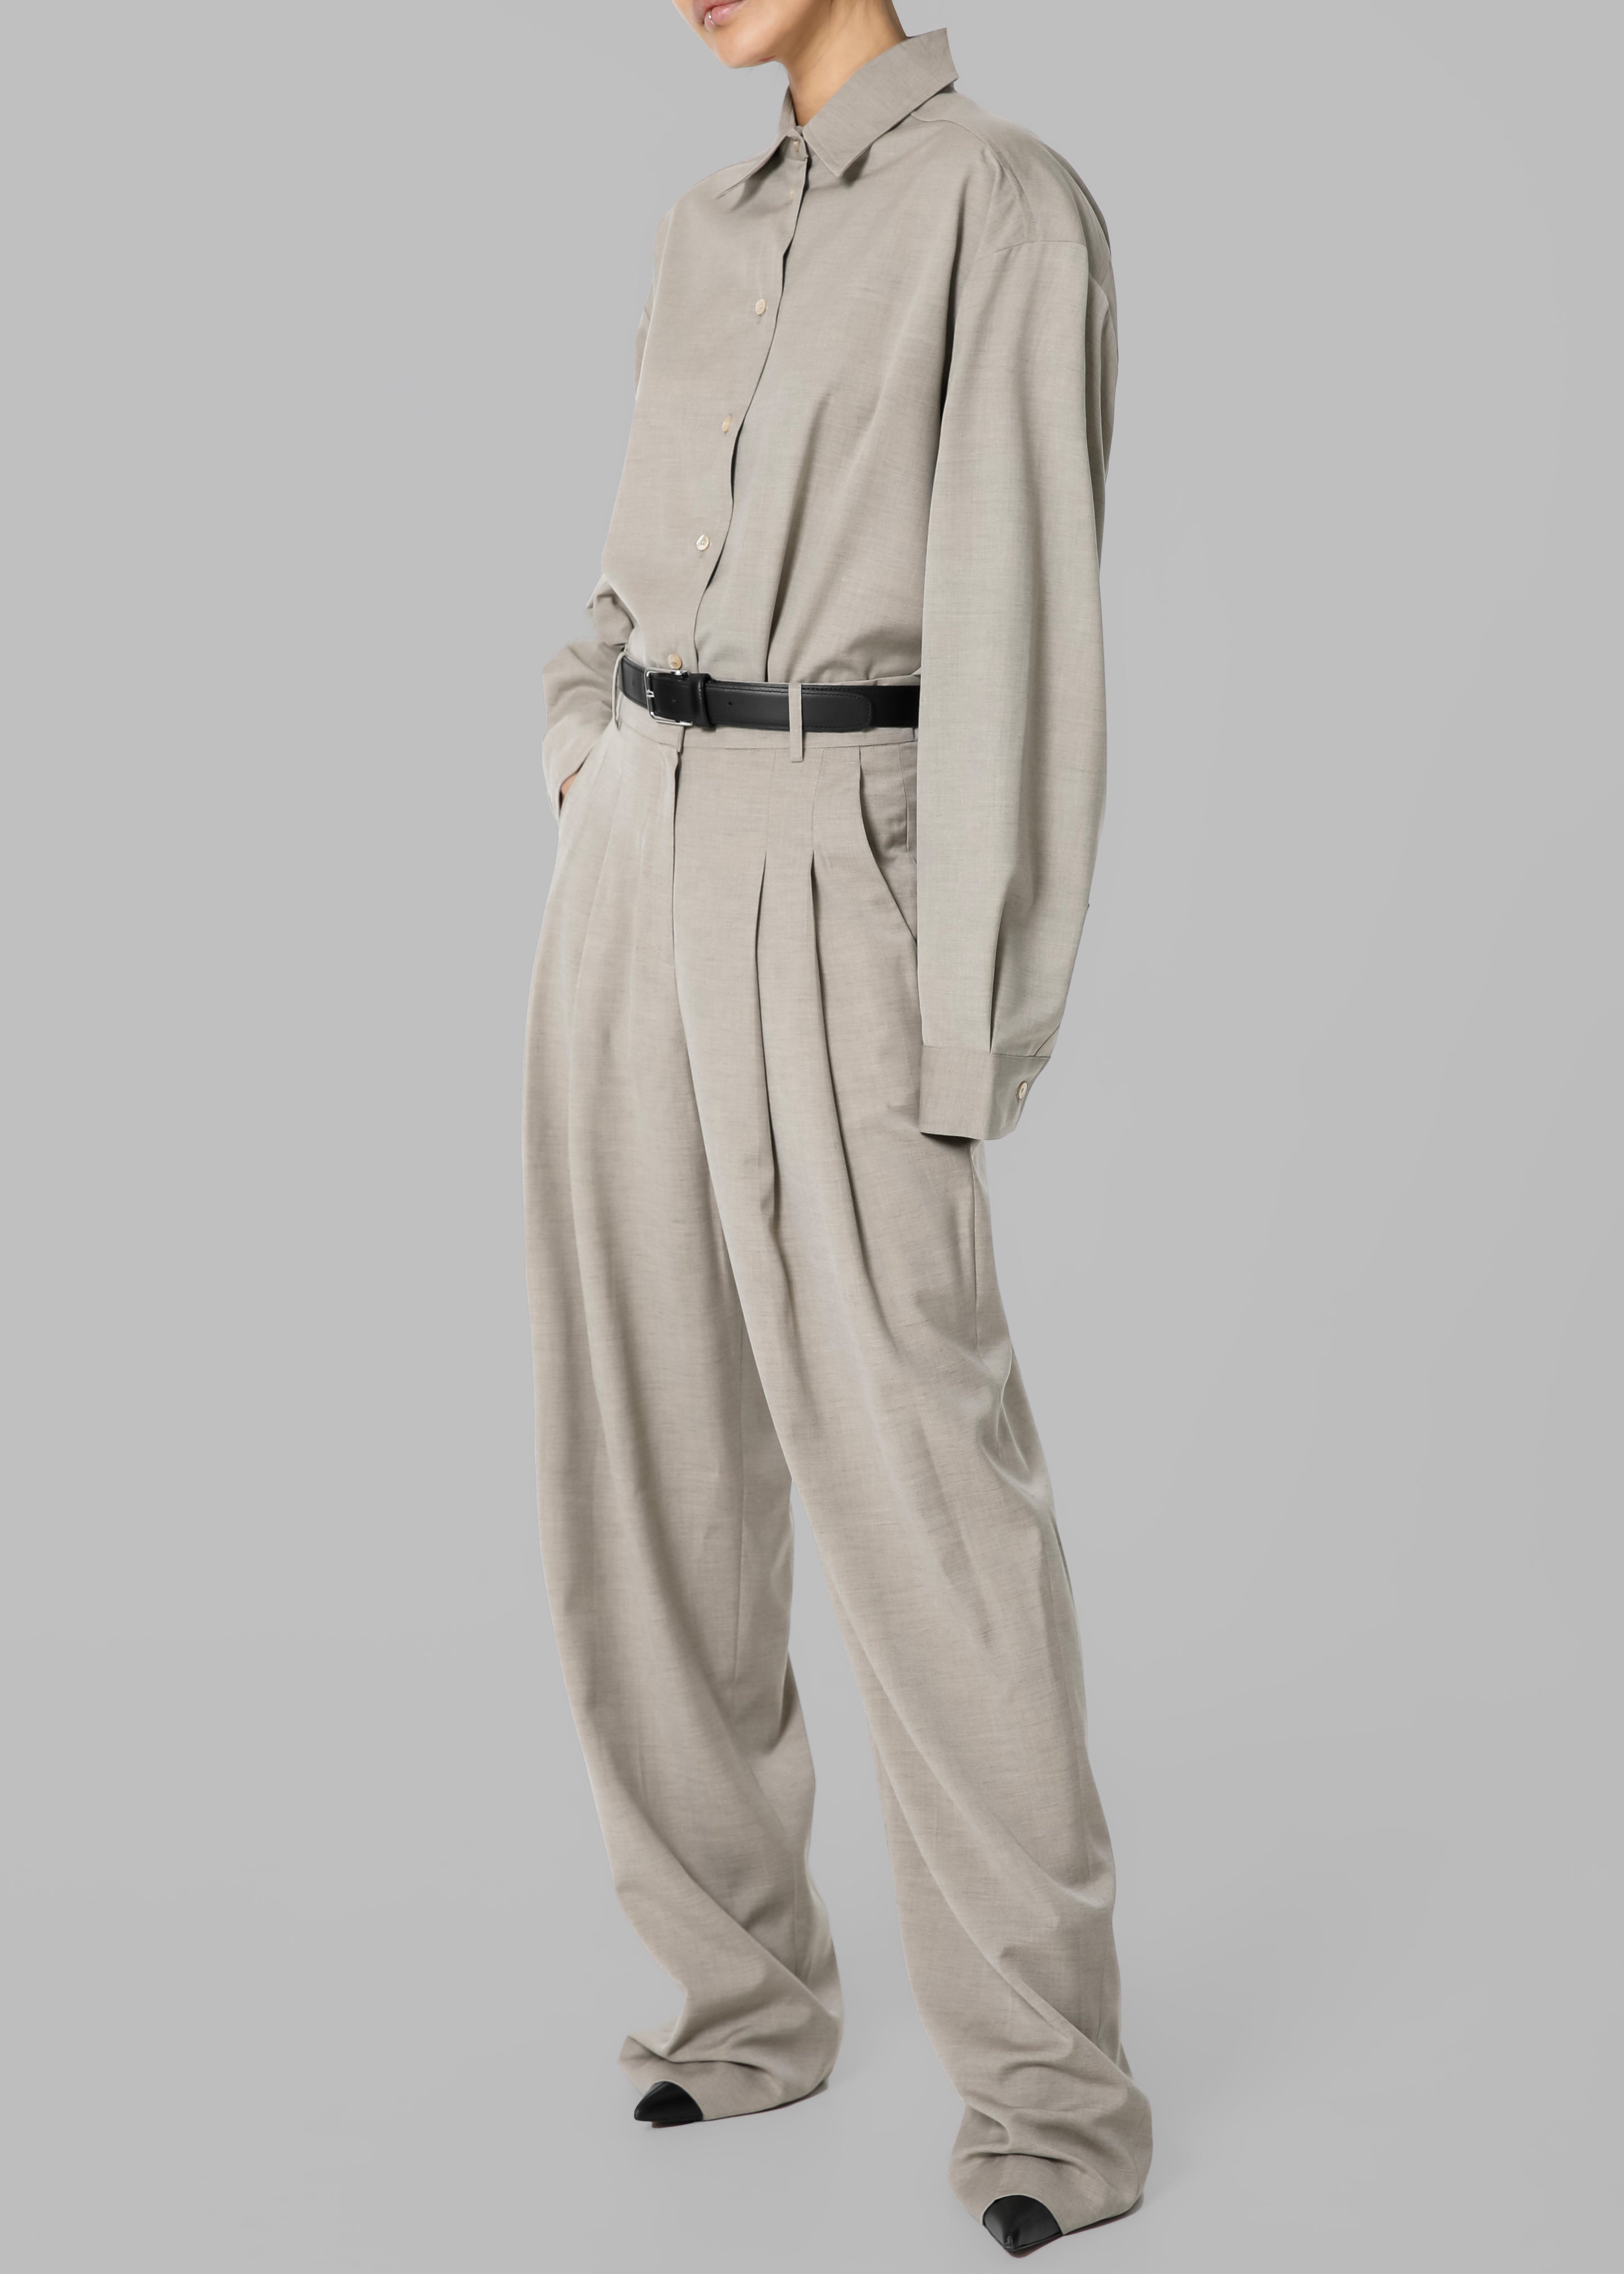 Gelso Pleated Trousers - Light Taupe Melange - 23